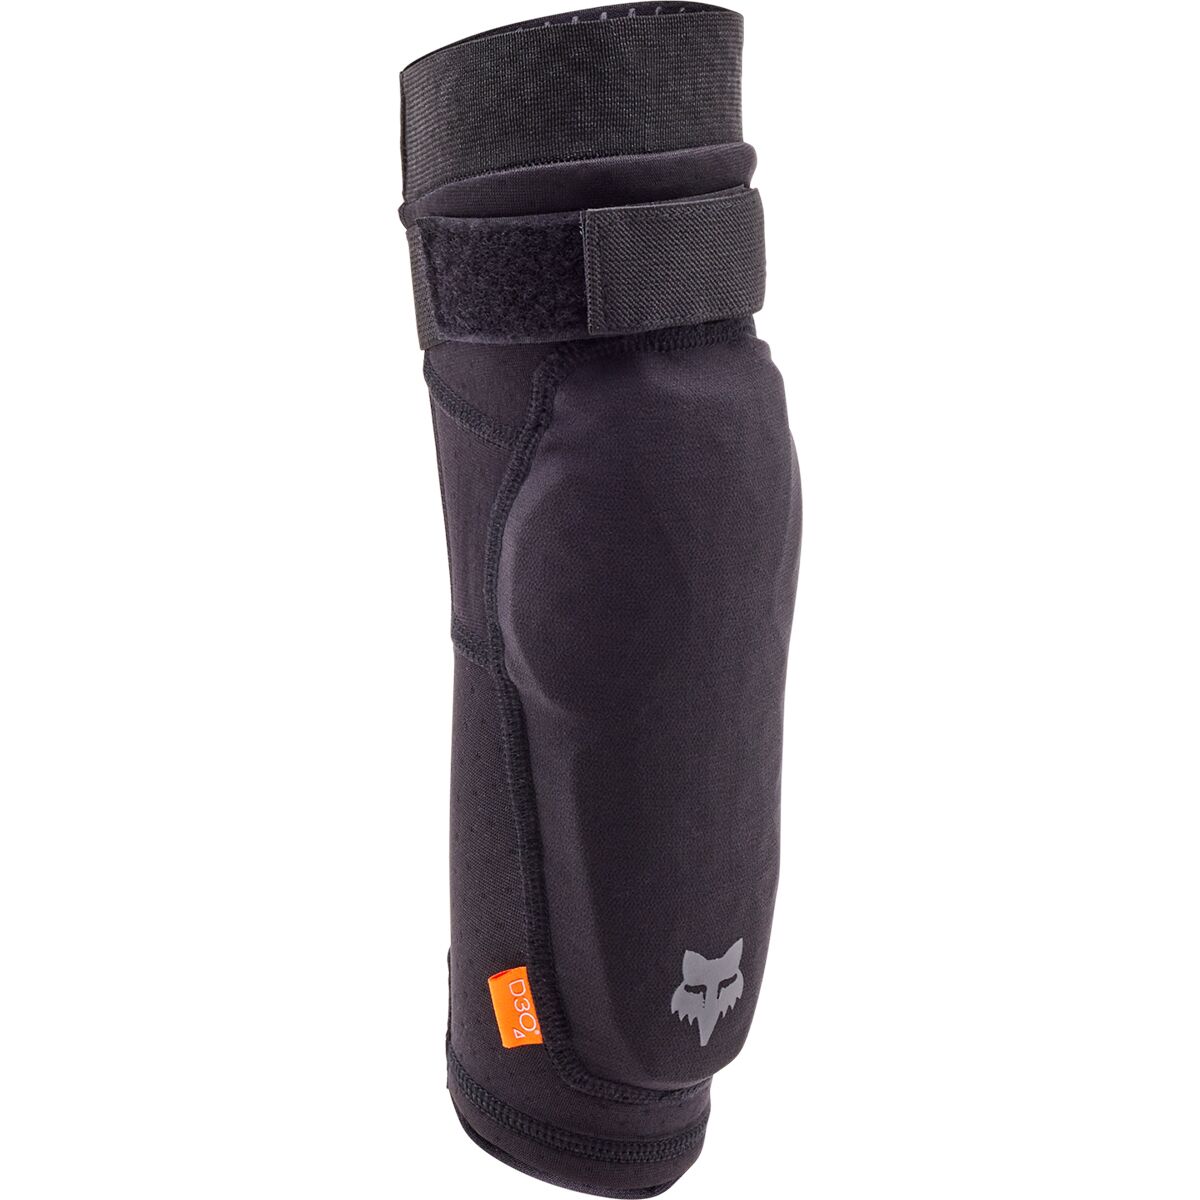 Launch D3O Arm/Elbow Pad - Kids'